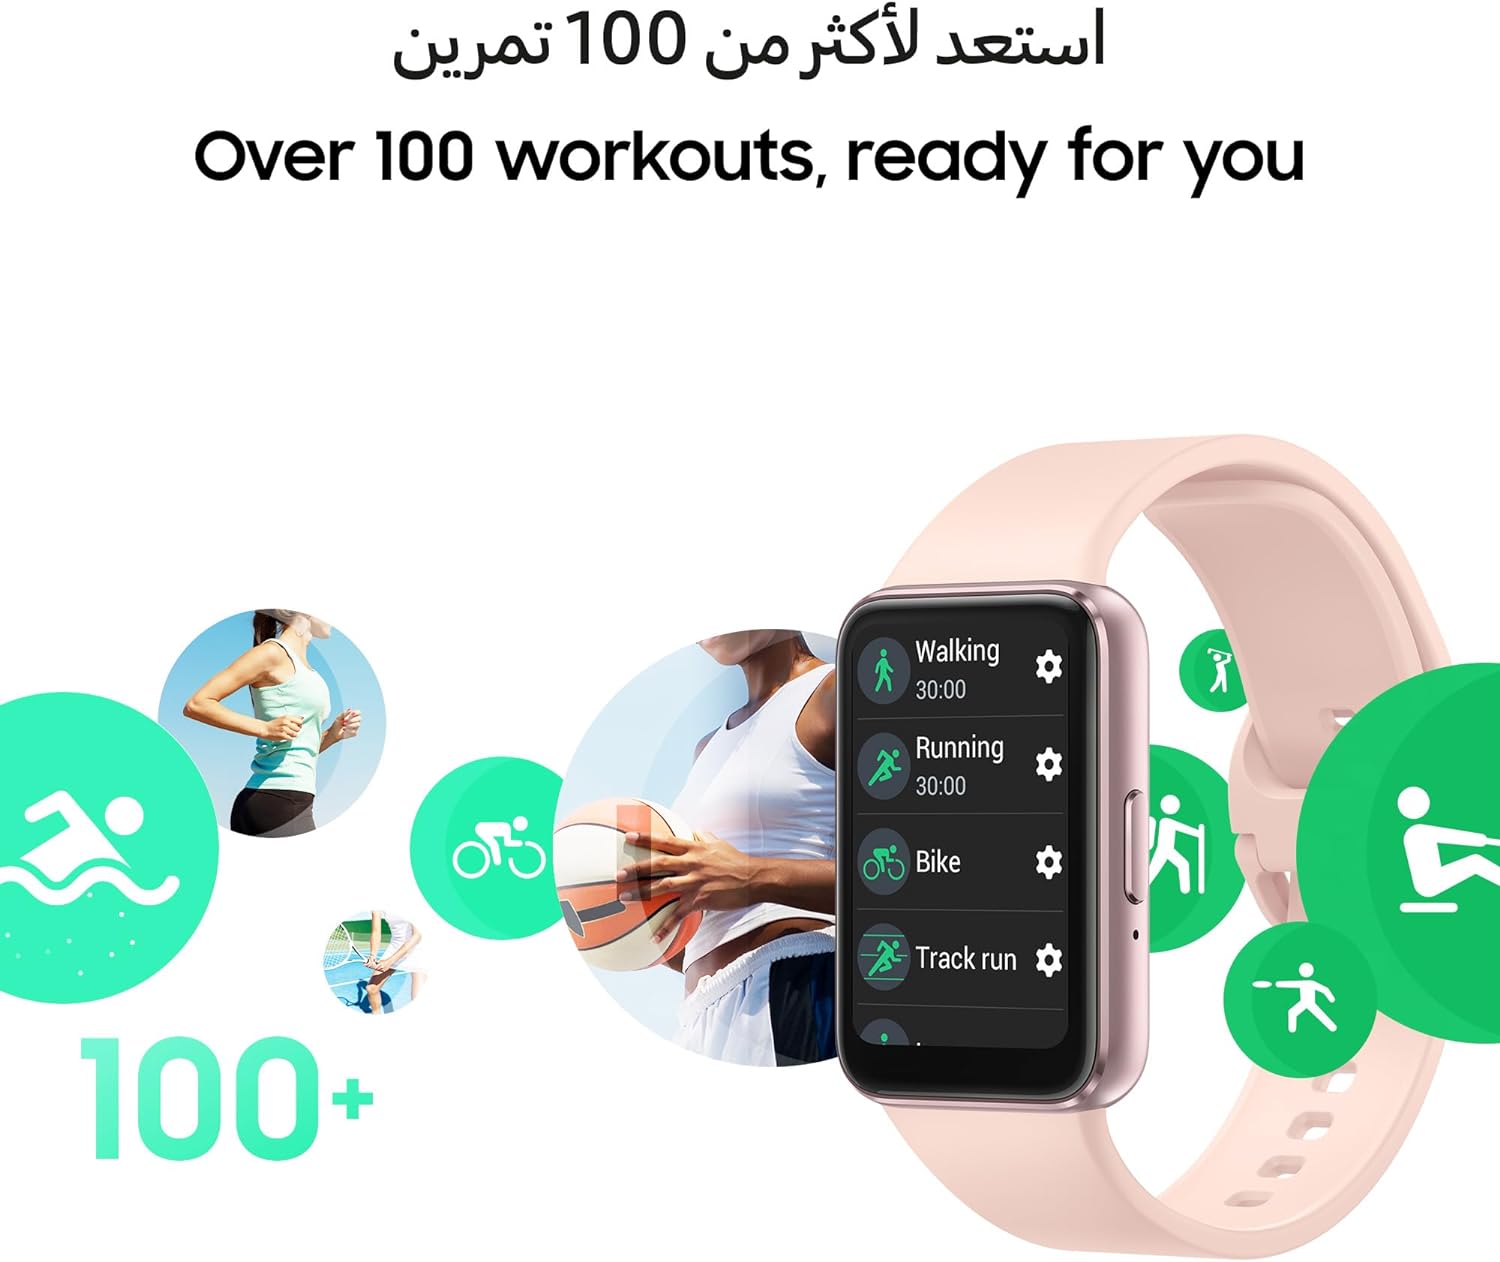 Samsung Galaxy Fit3 Fitness Band - Stay connected with photos, music, texts, calls on wrist. 8806095380353